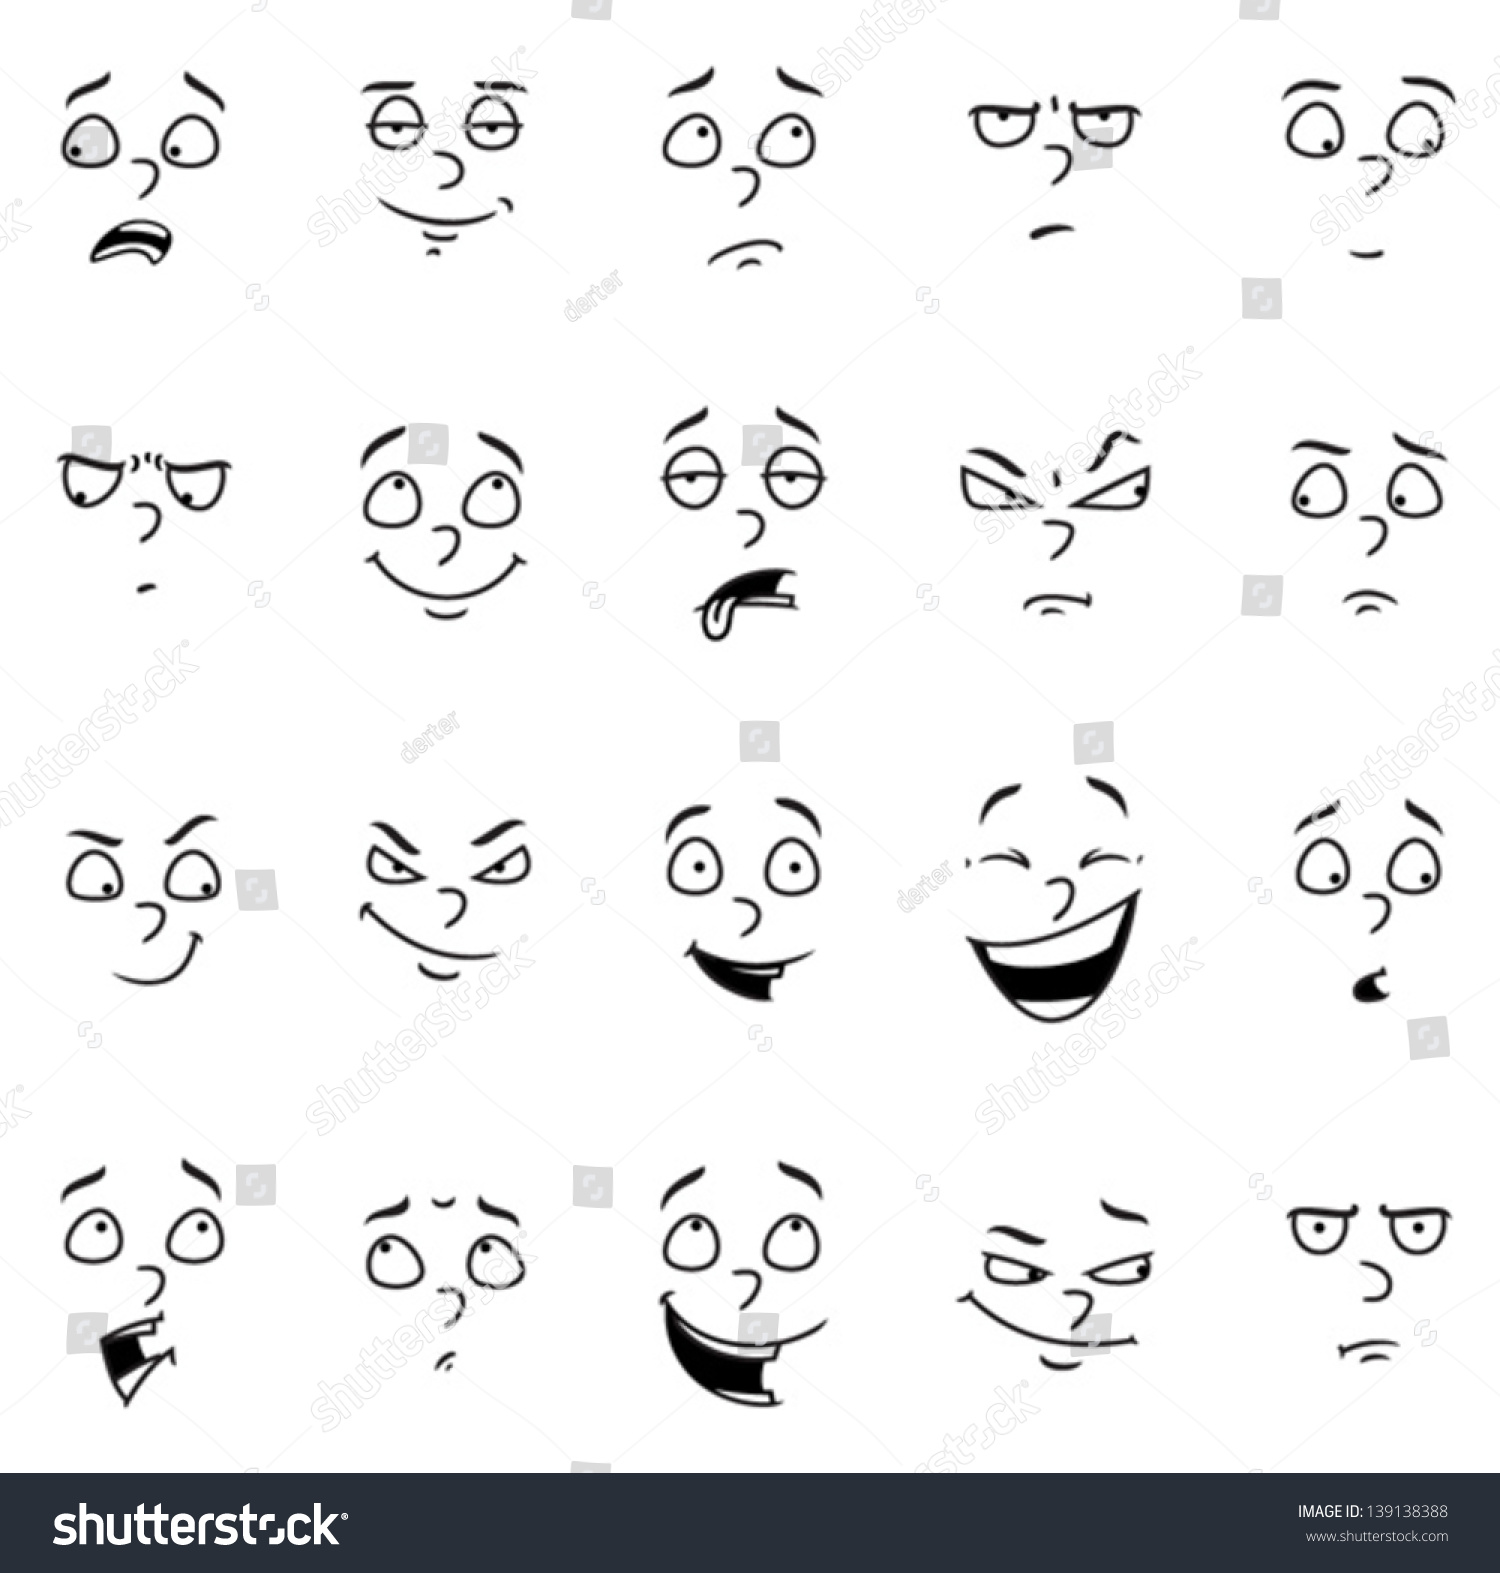 emotions clipart black and white - photo #30